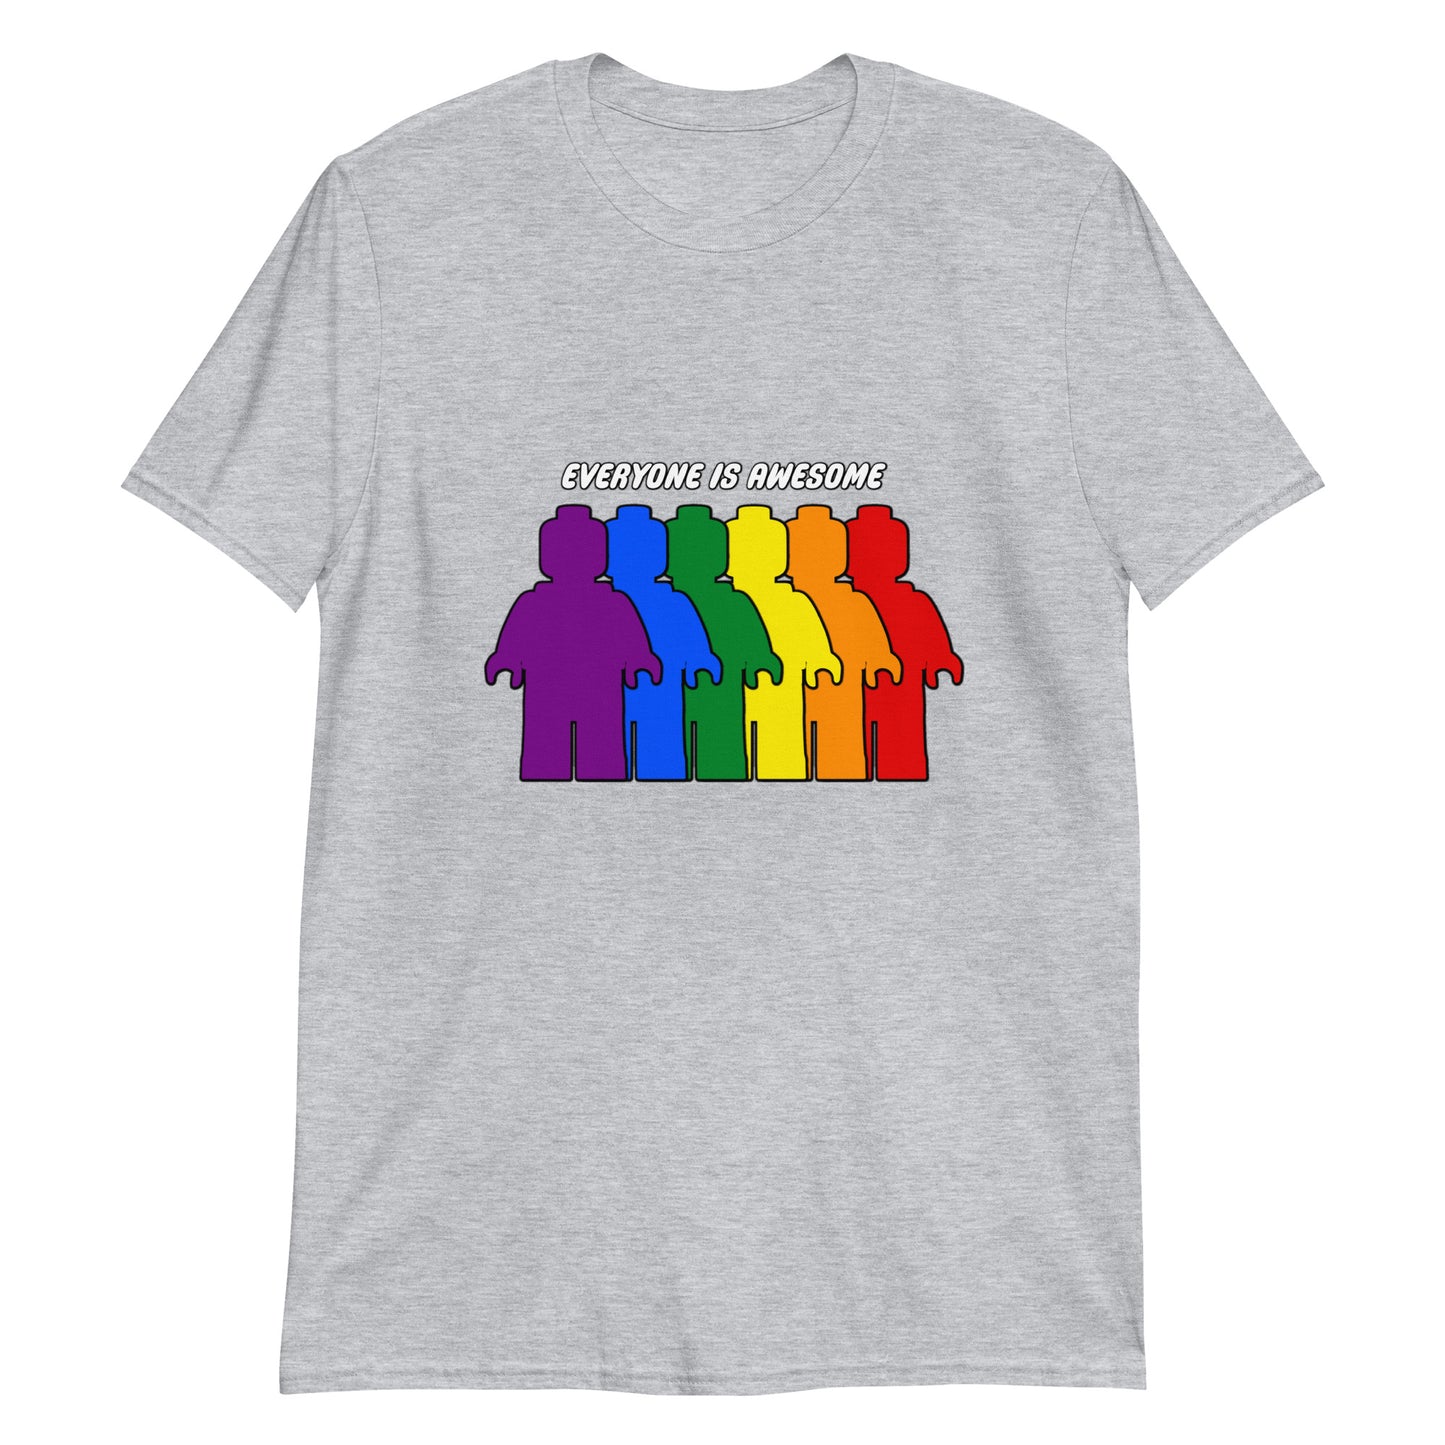 Everyone is Awesome LEGO Themed T-Shirt